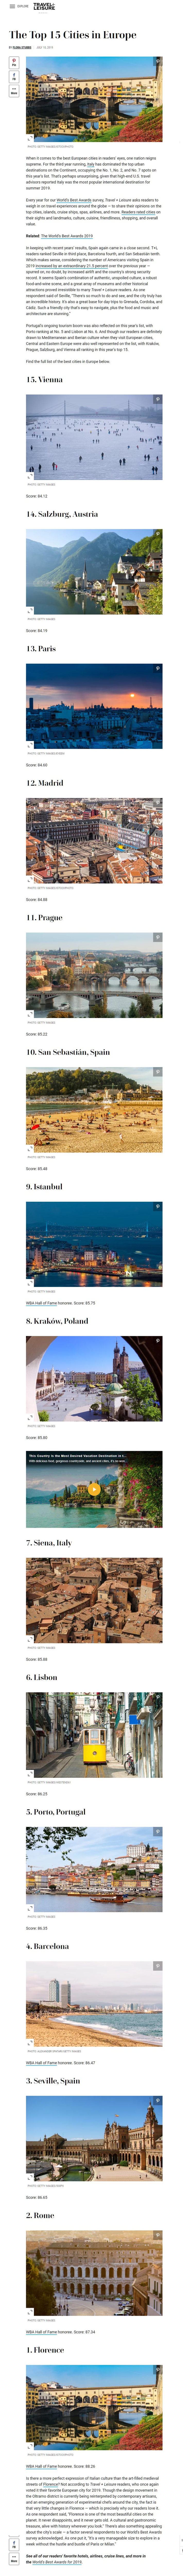 the-top-15-cities-europe